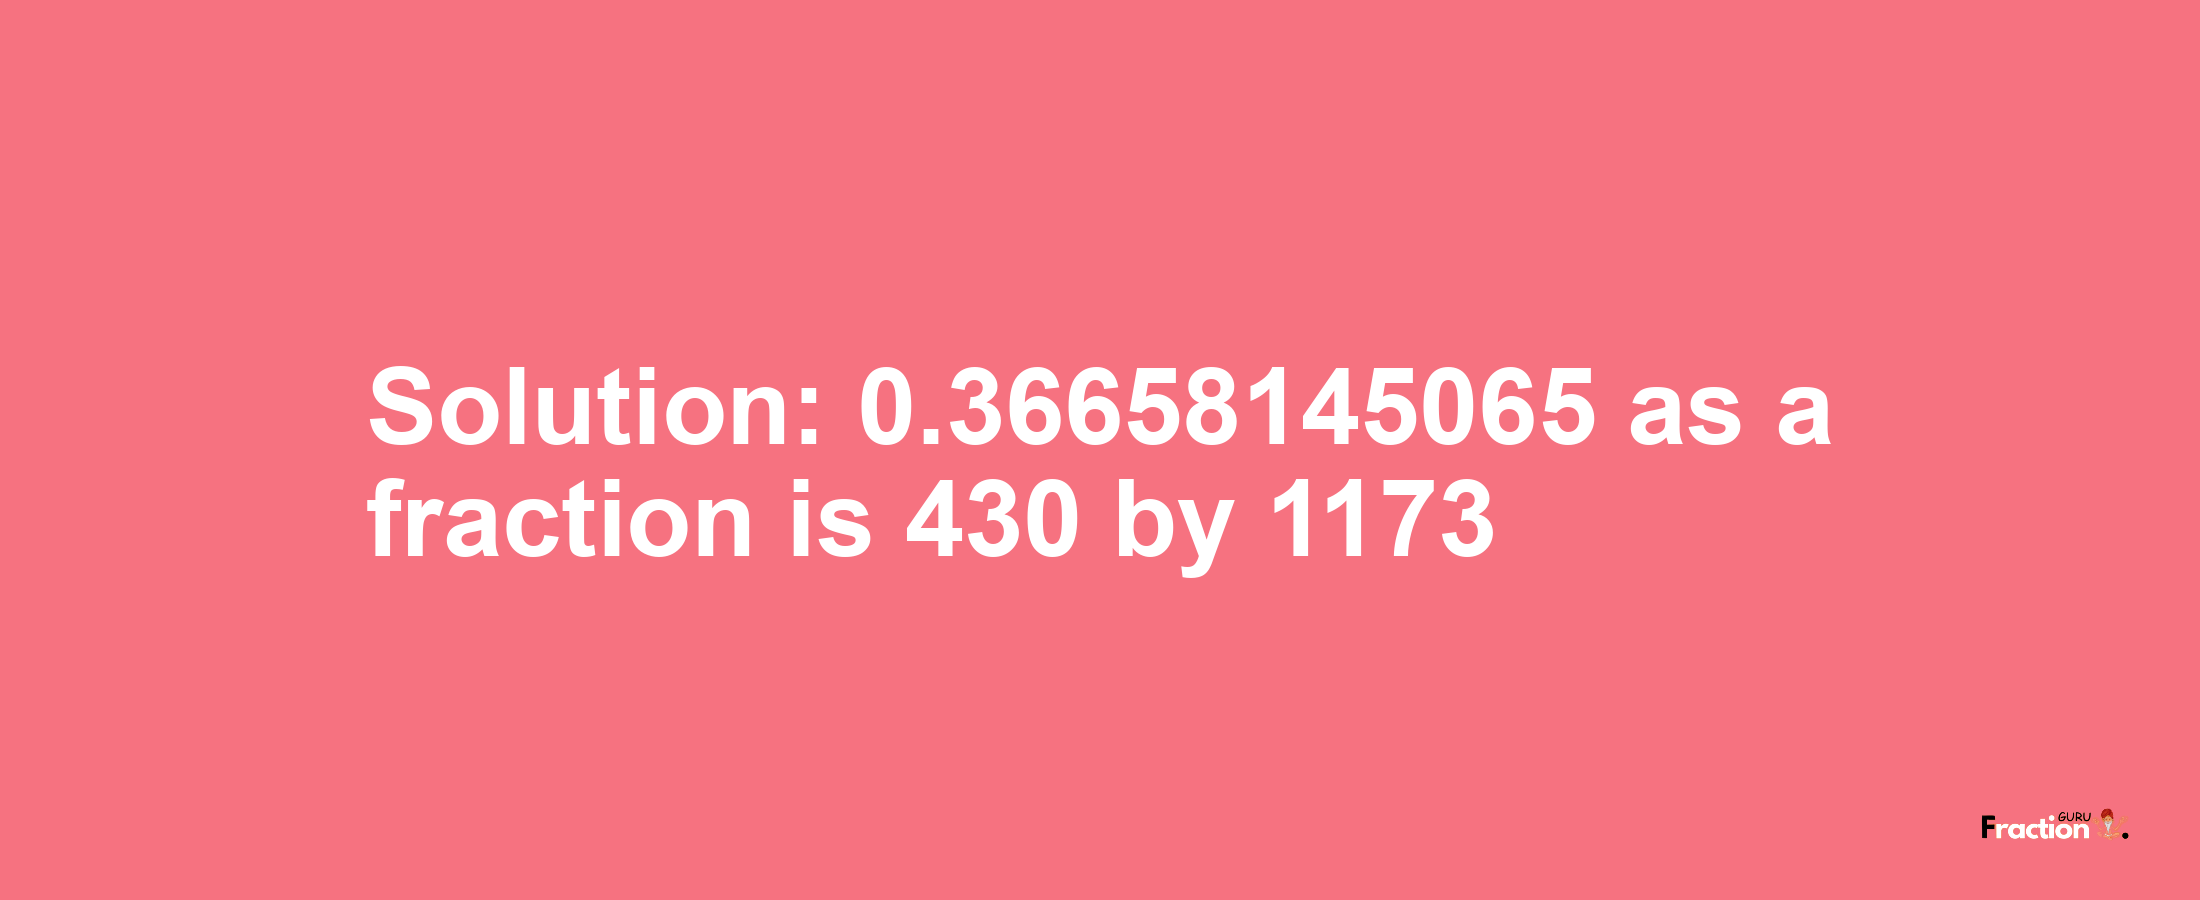 Solution:0.36658145065 as a fraction is 430/1173